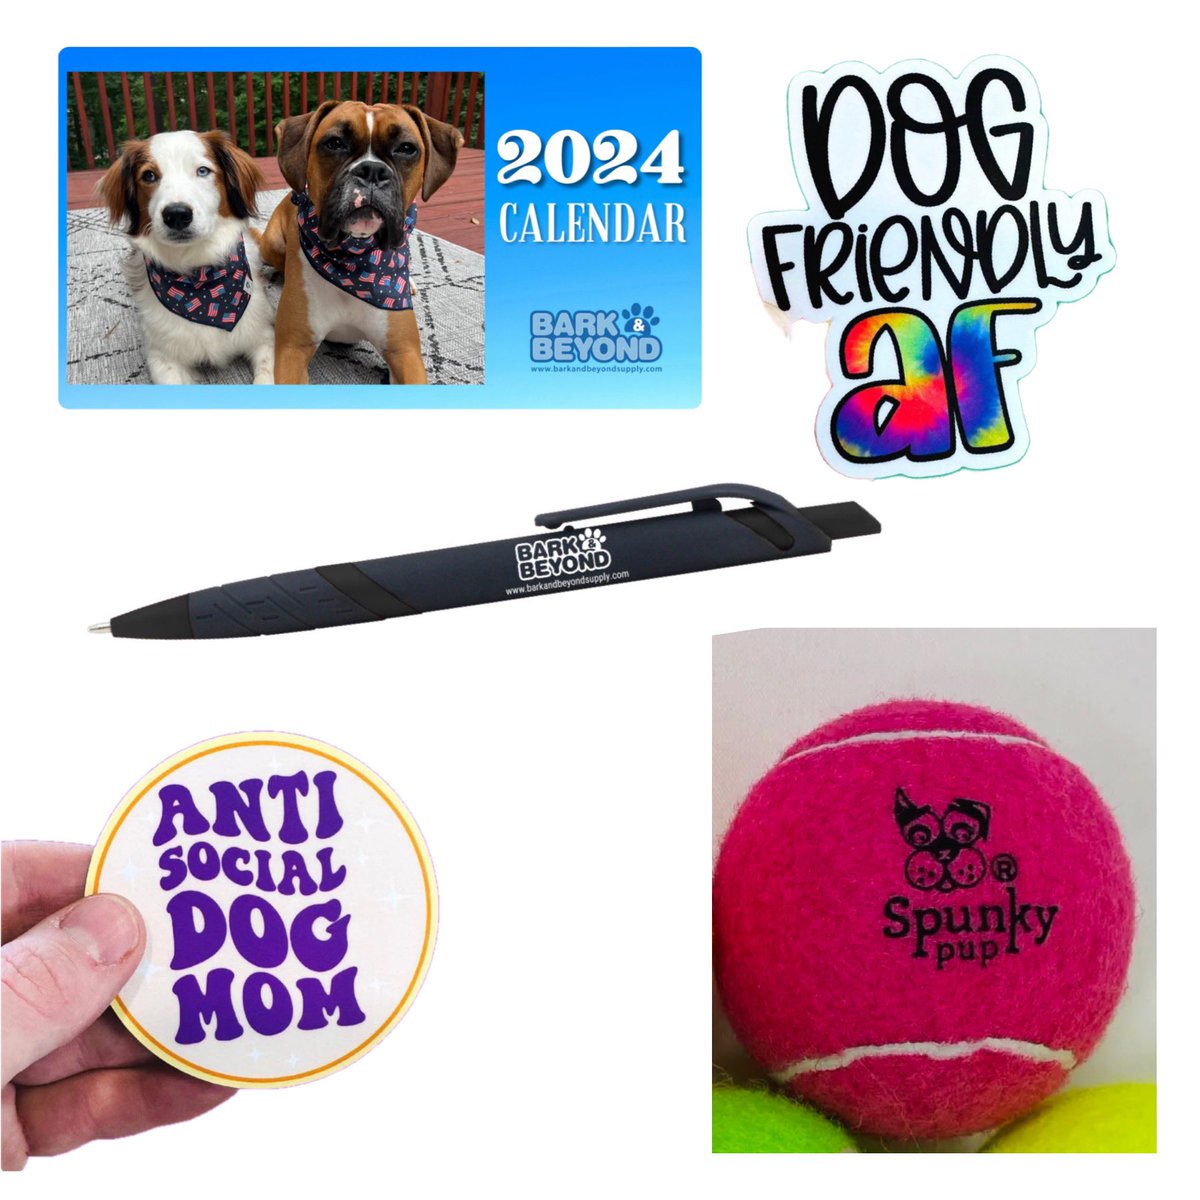 If you like 🆓 FREE 🆓 stuff just go here 👉 barkandbeyondsupply.com/collections/on… and add ONE of the free items below to your cart 🛒 

HURRY!! While supplies last! 💨 

#free #freestuff #dogsoftwitter #CatsOfTwitter #dogsofx #shopsmall @WCrates @Moooo1985 @Kanethedane10 @ElizGriff2016